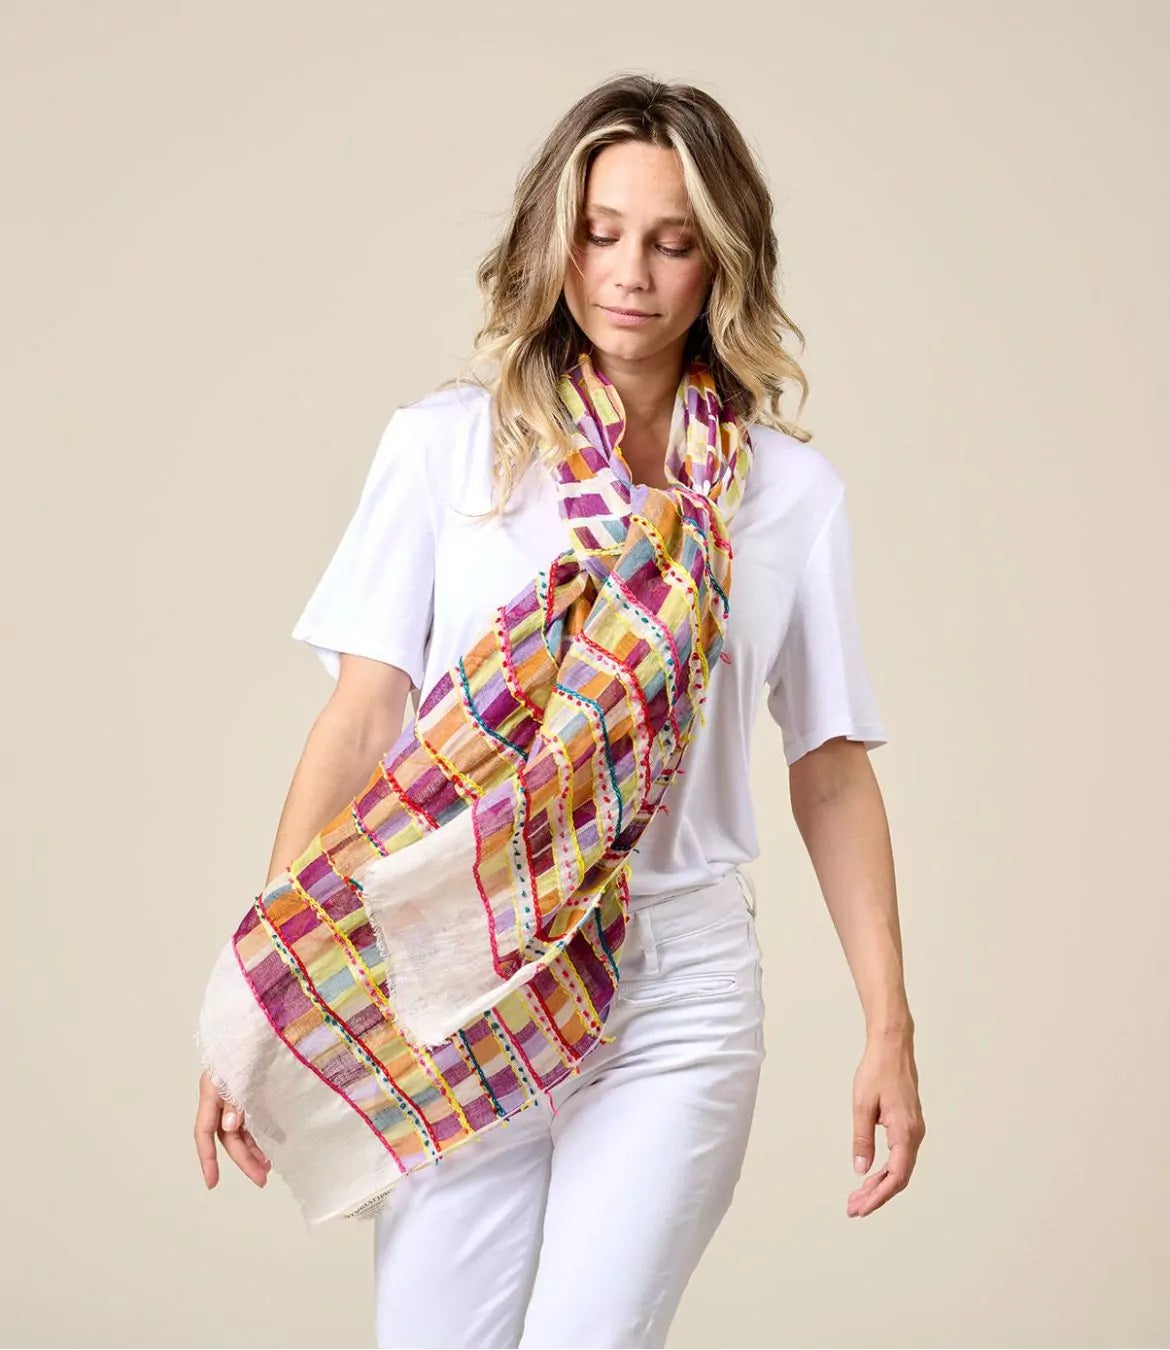 Geometric Embroidered Mosaic Scarf